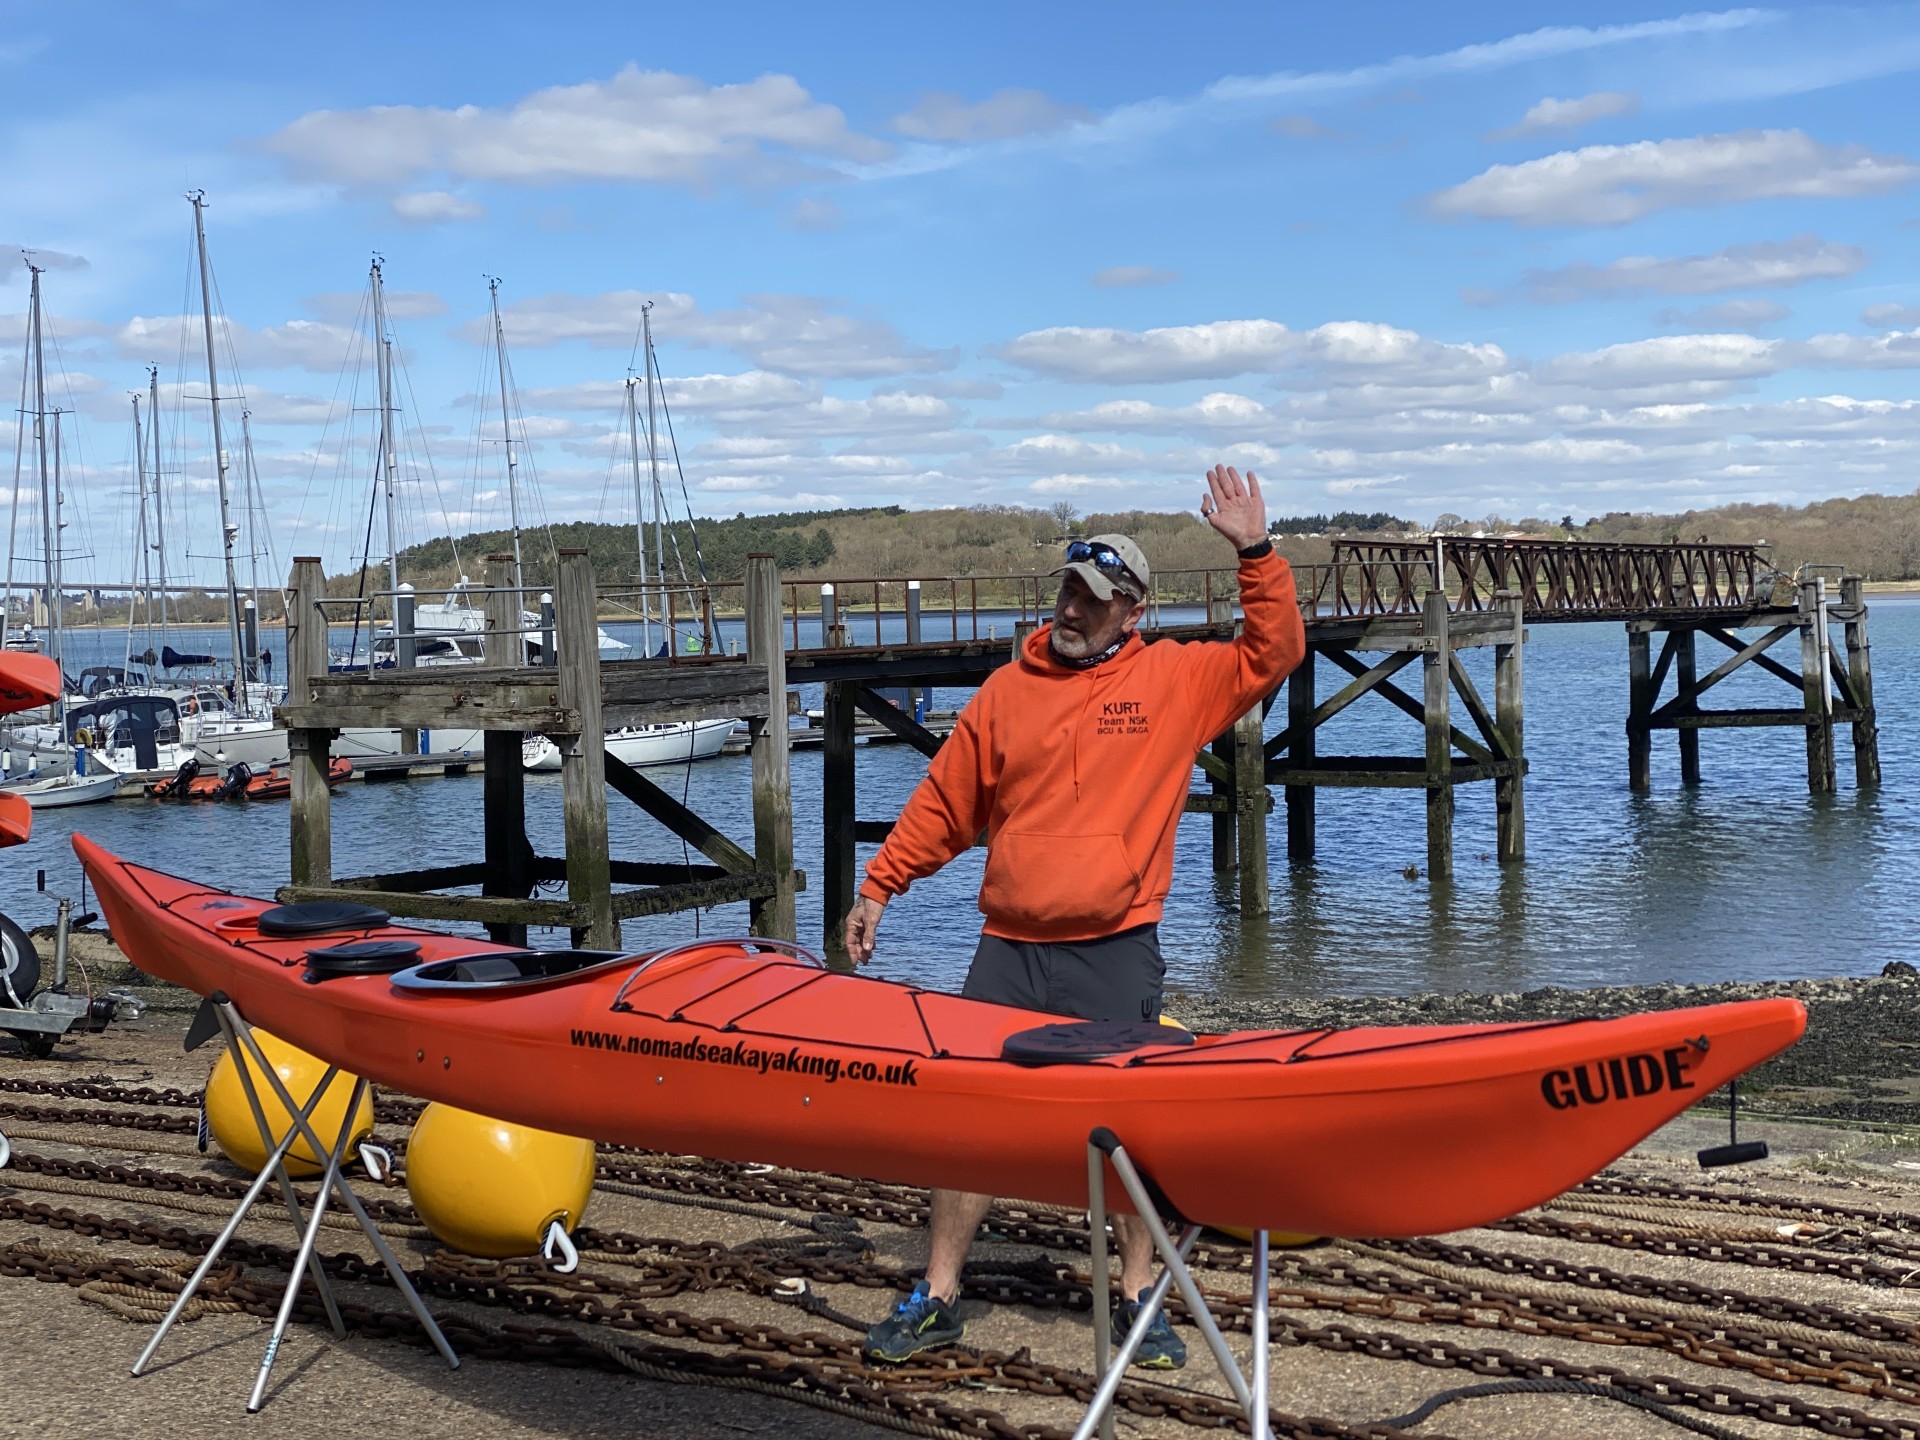 Boat dynamics on Intro to sea kayaking training course.